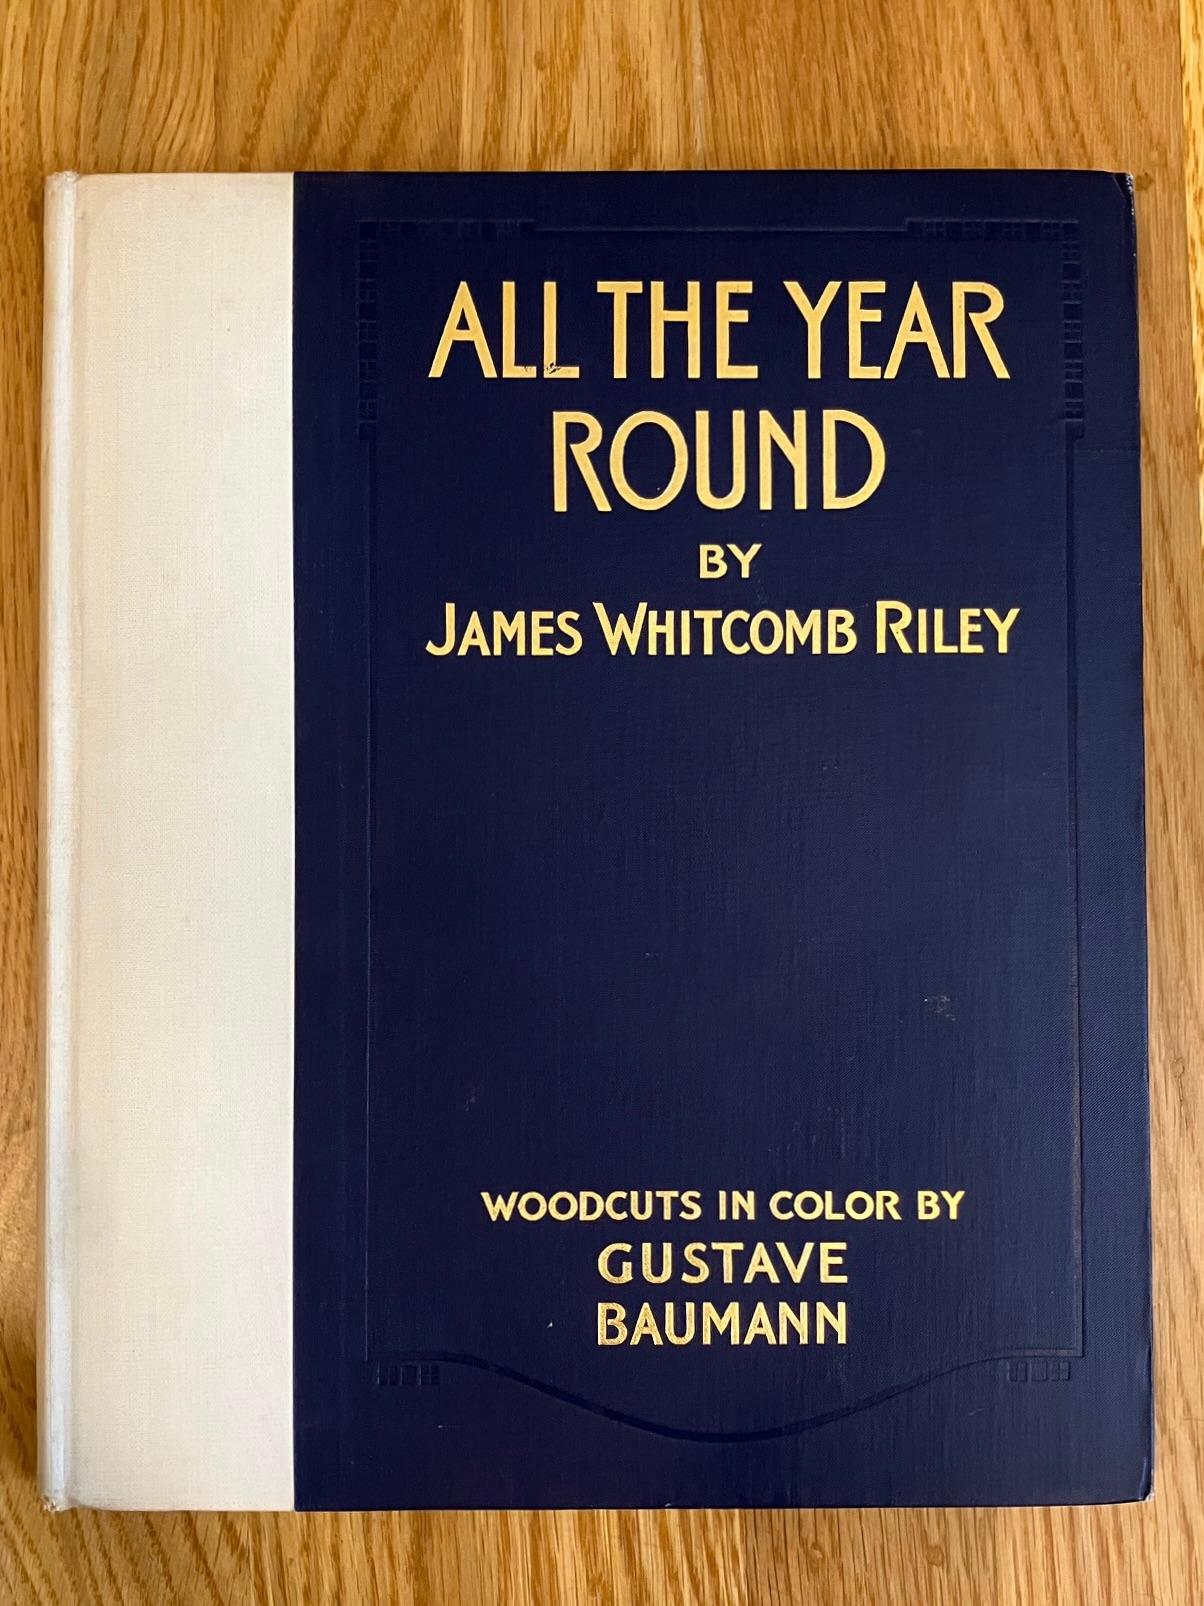 All the Year Round by James Whitcomb Riley with Woodcuts by Gustave Baumann. Published by Bobbs-Merrill, Indianapolis 1912. Nice copy including 12 lovely woodcuts by American painter and printmaker Baumann (1881-1917). Each month of the year has a